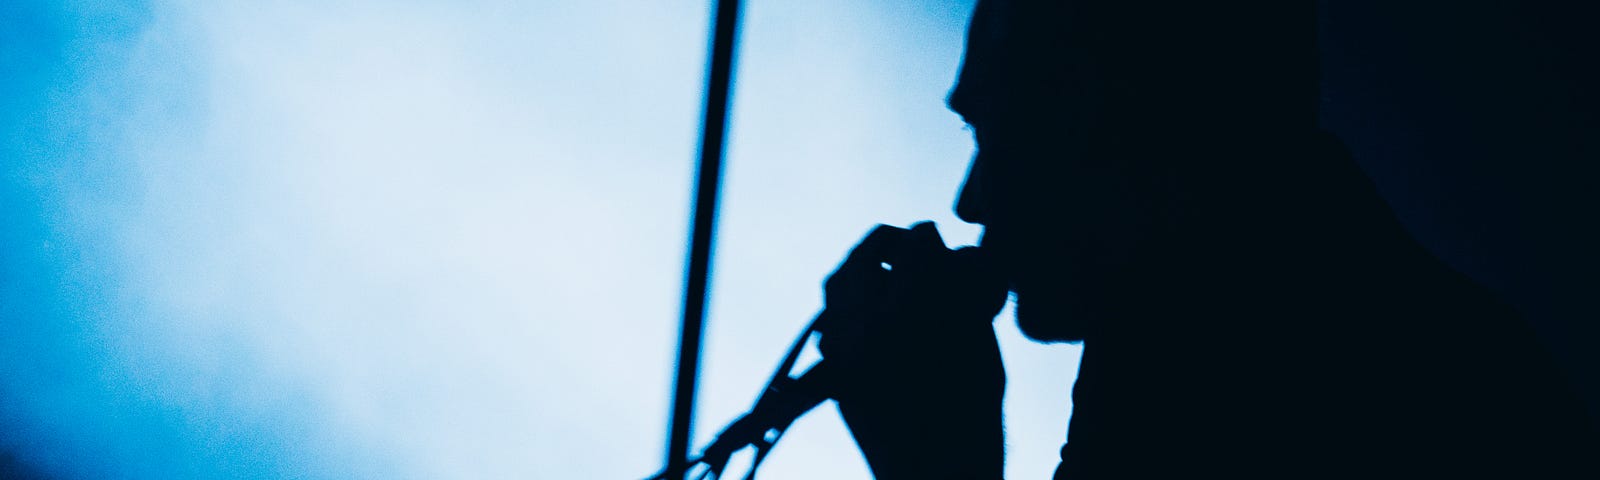 Silhouette of James Reid leaning into mic against blue stagelight and shadow.